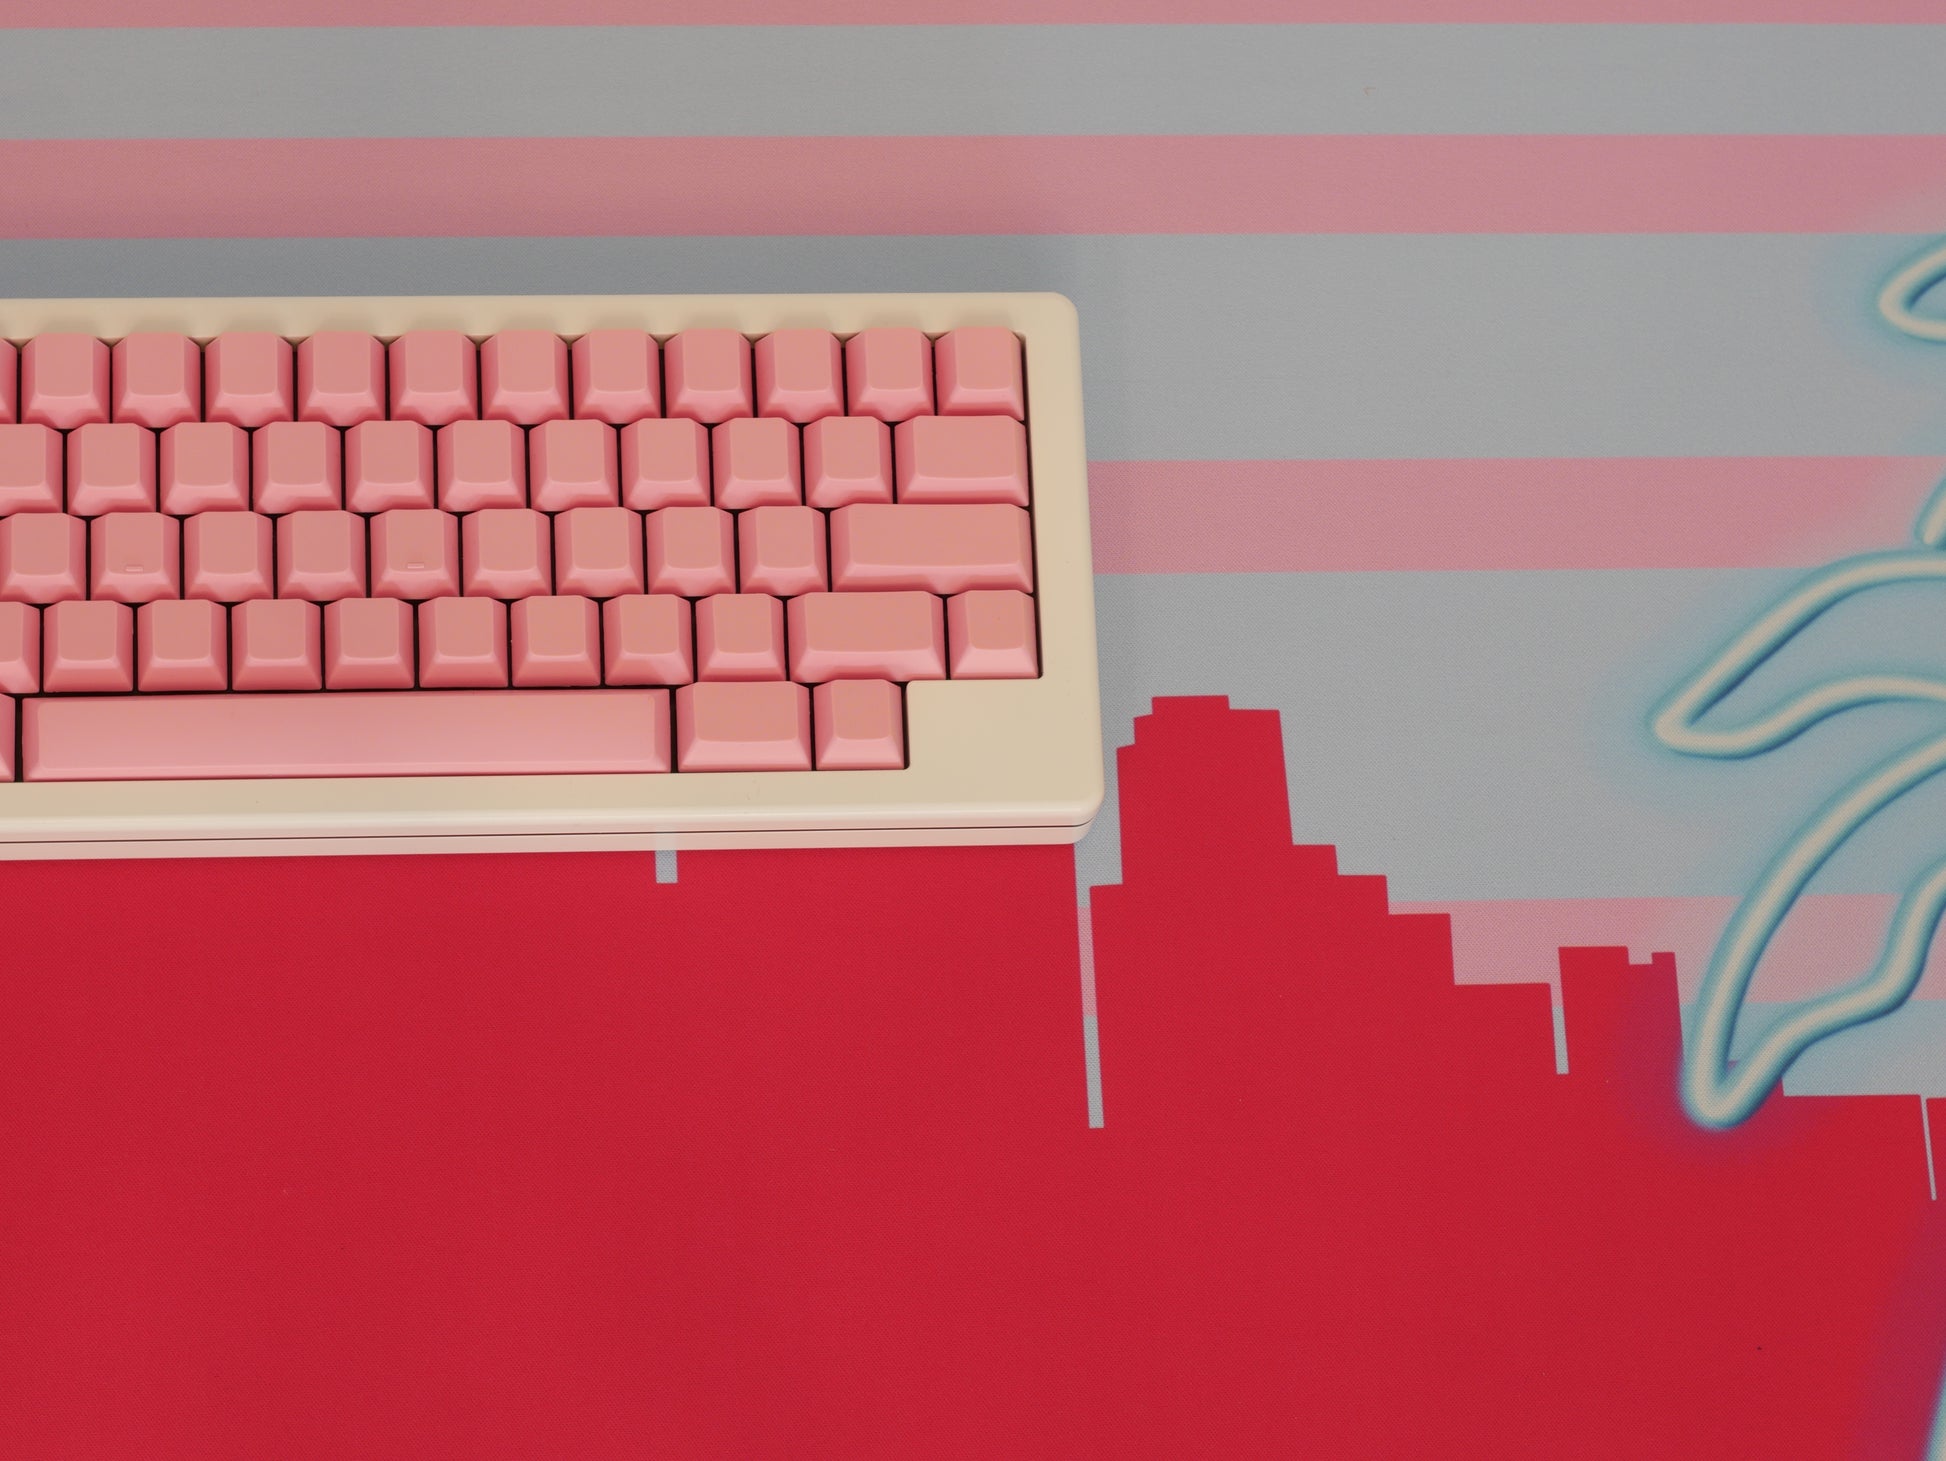 Middle of the pink and blue Miami skyline desk mat. A white keyboard with pink keycaps sits on top of it.